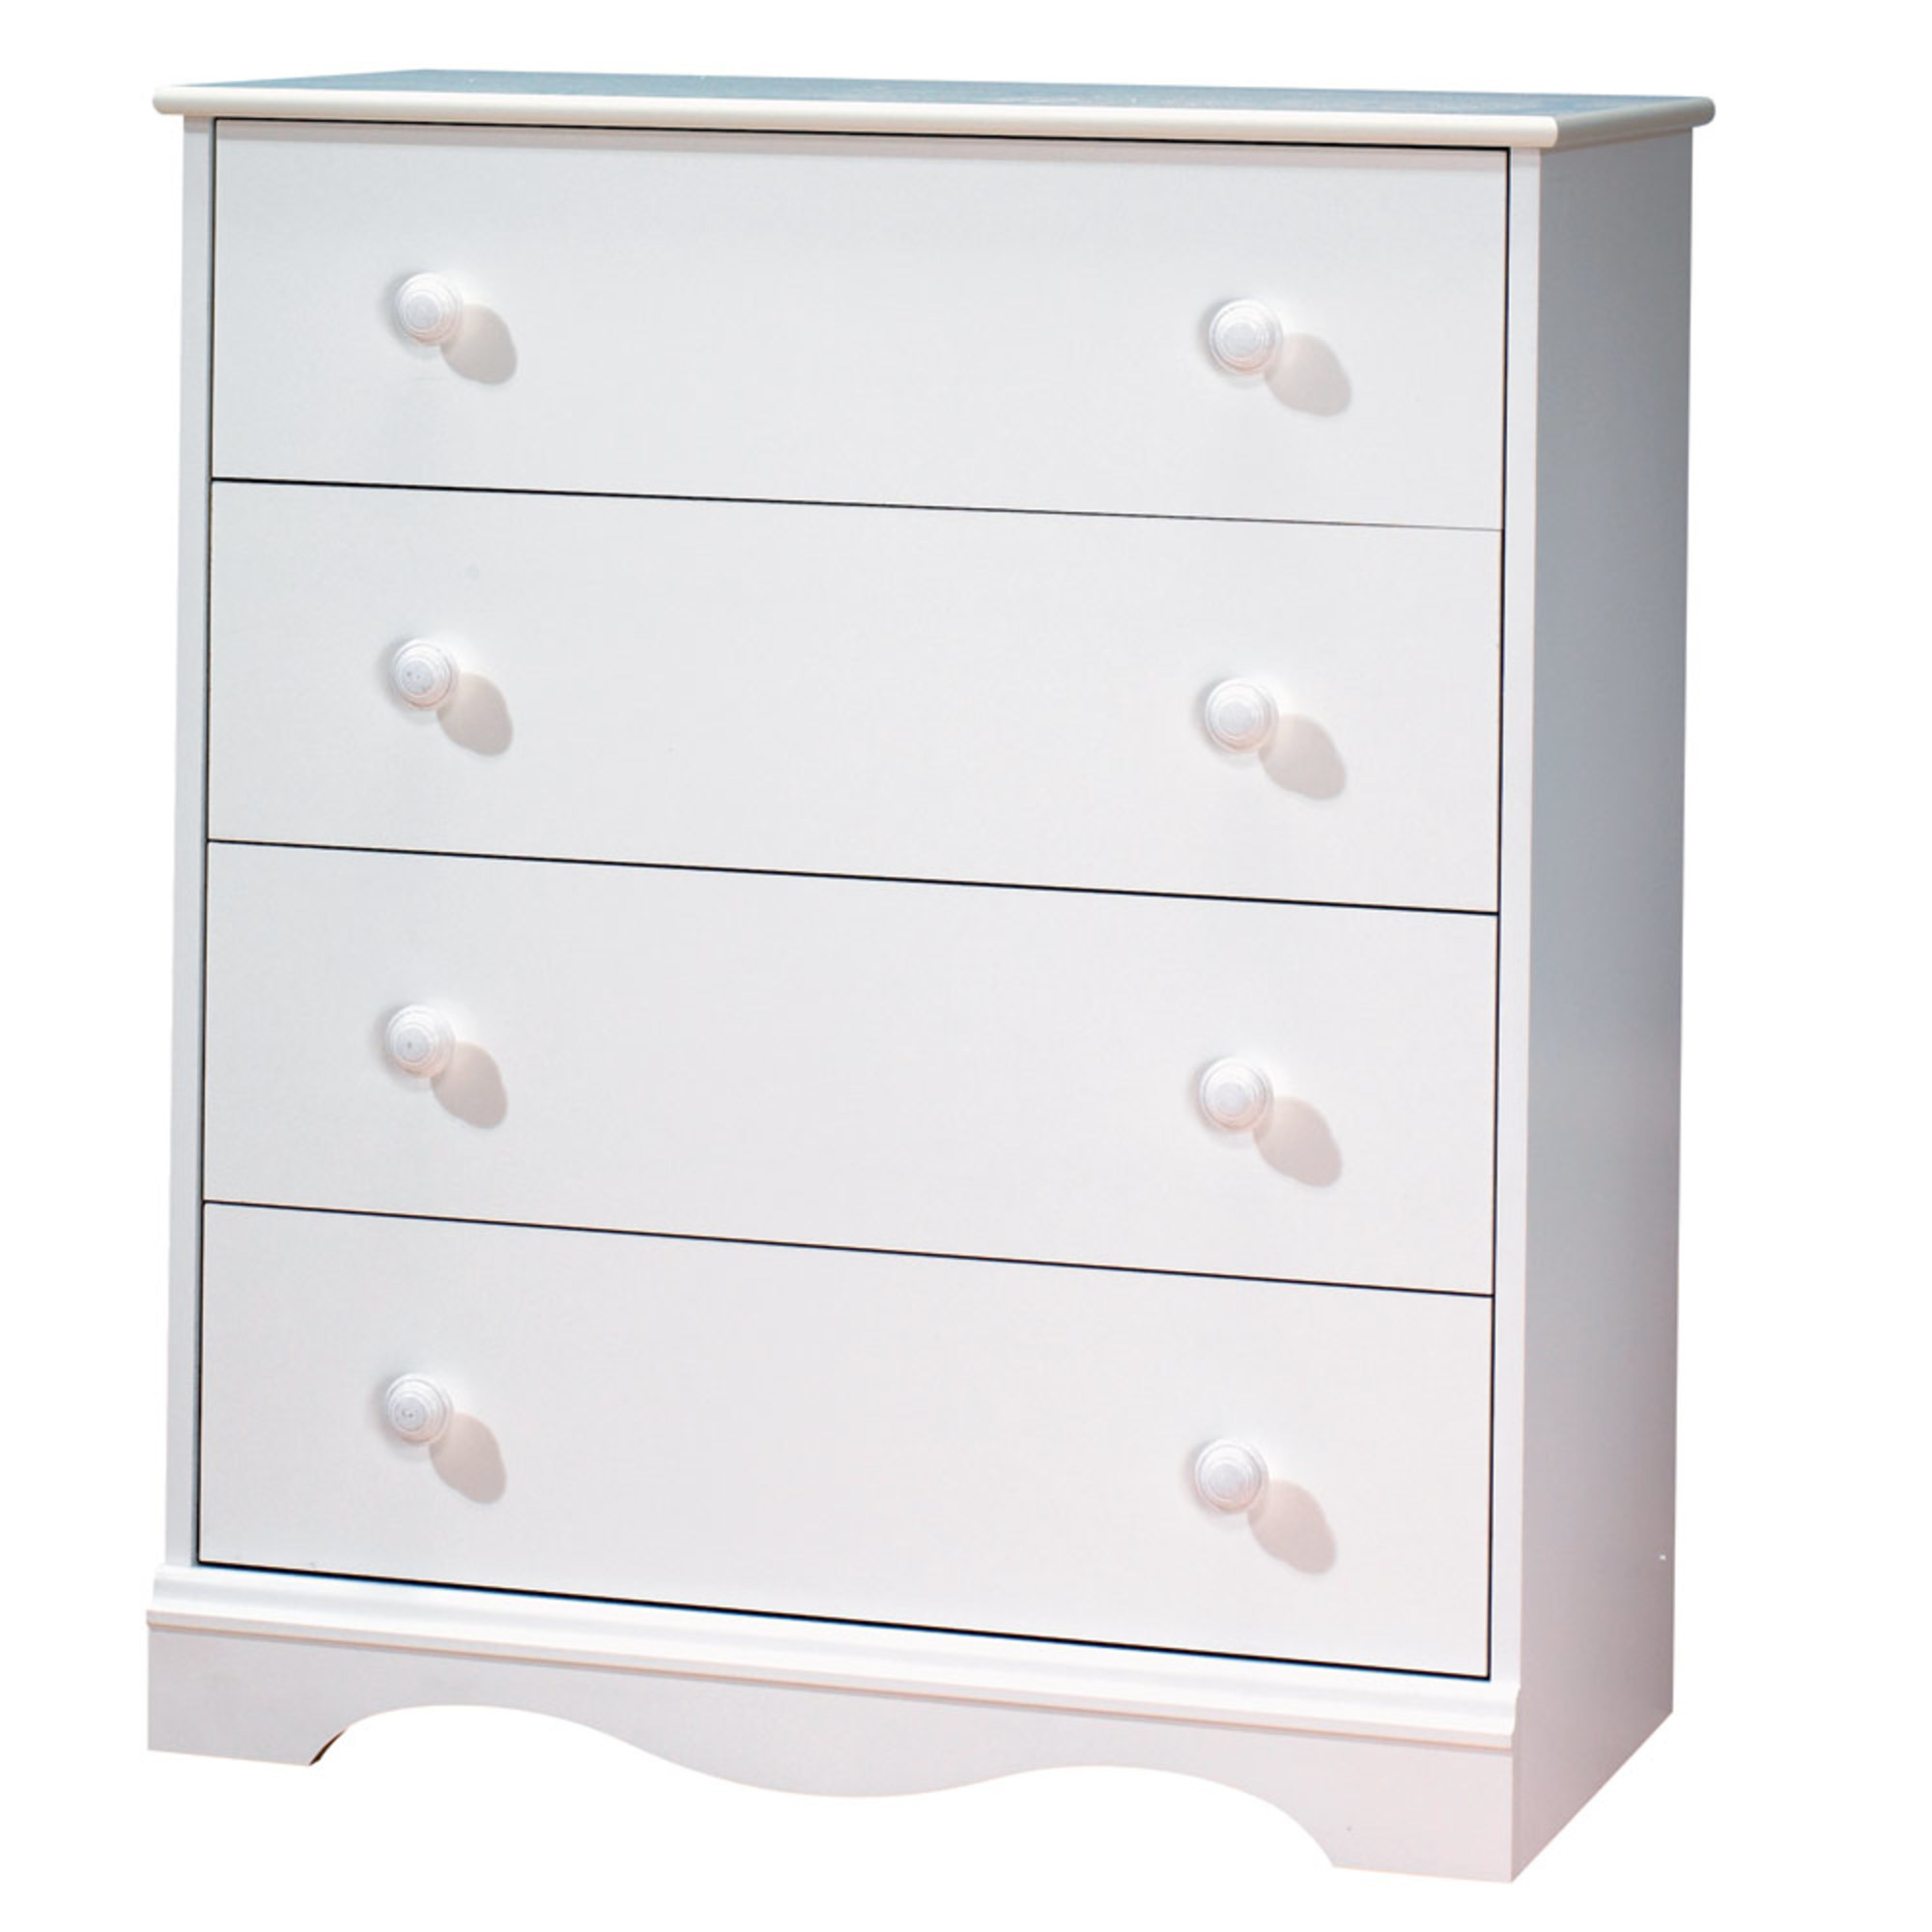 South Shore Angel Traditional 4 Drawers Chest, White - image 1 of 4